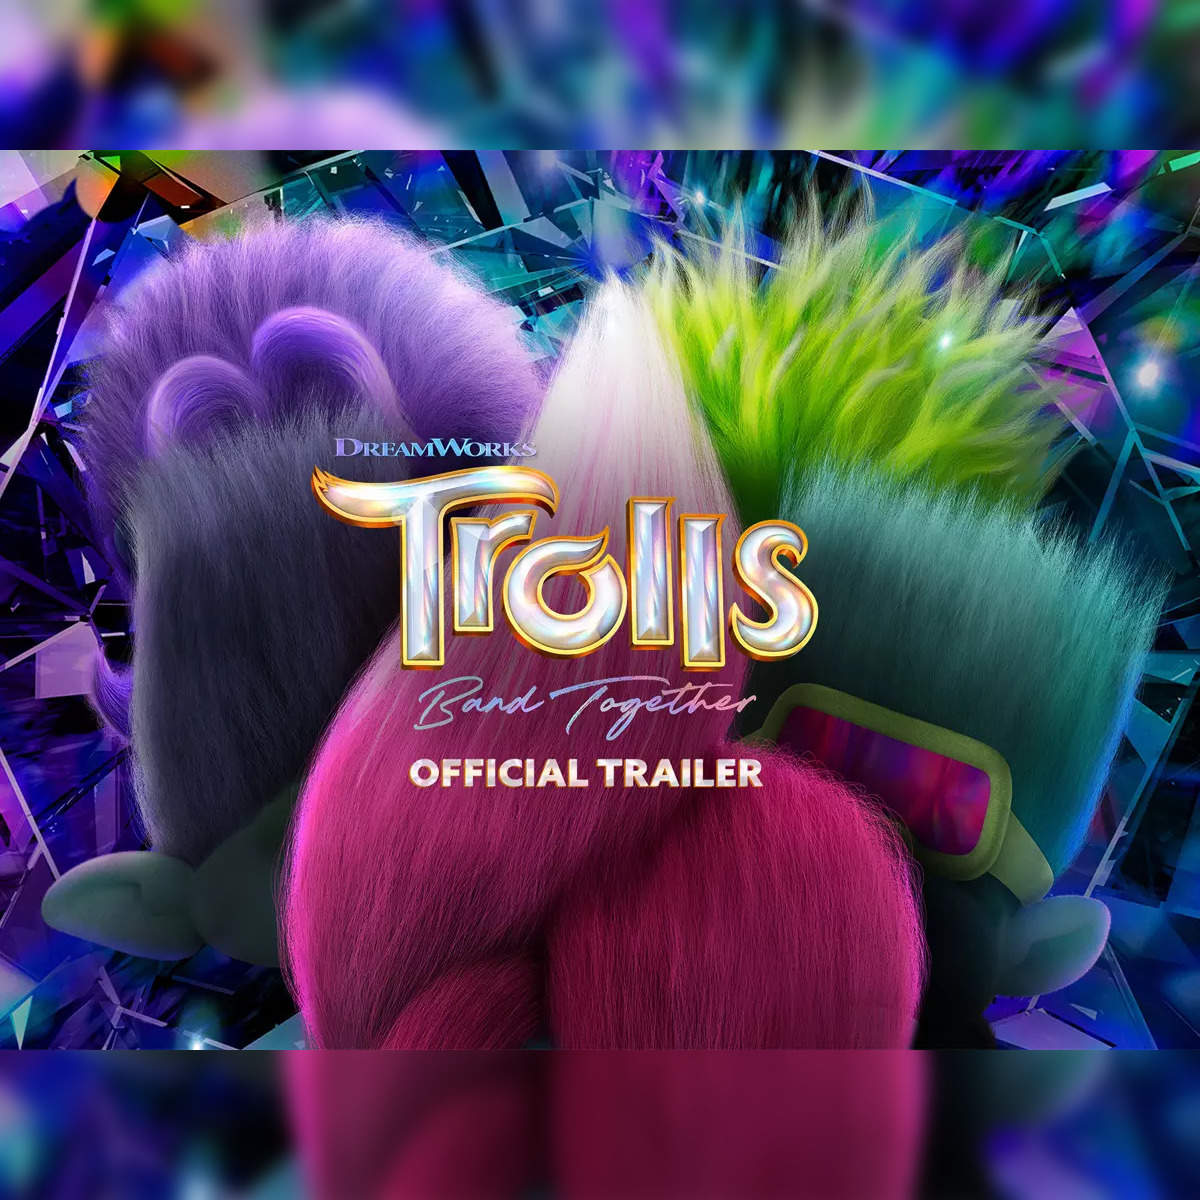 Trolls World Tour Watch At Home Premiere Party and Activities